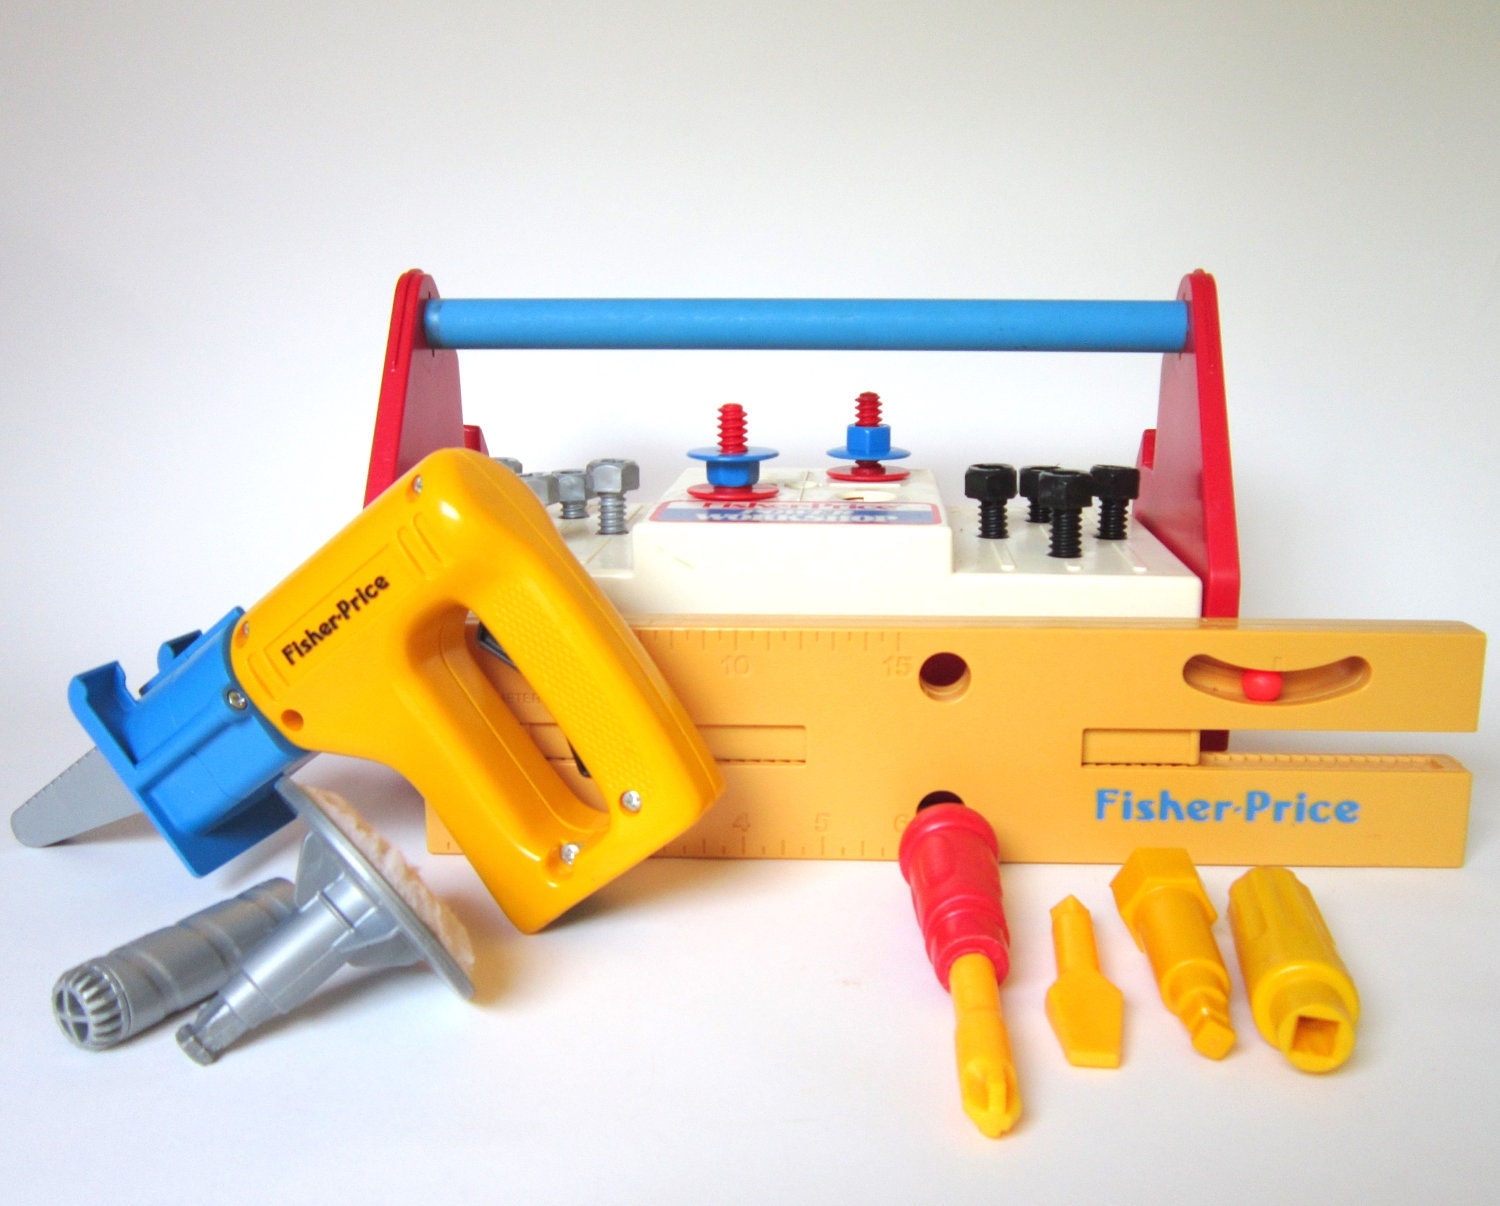 Vintage Fisher Price Power Workshop Tool Box and